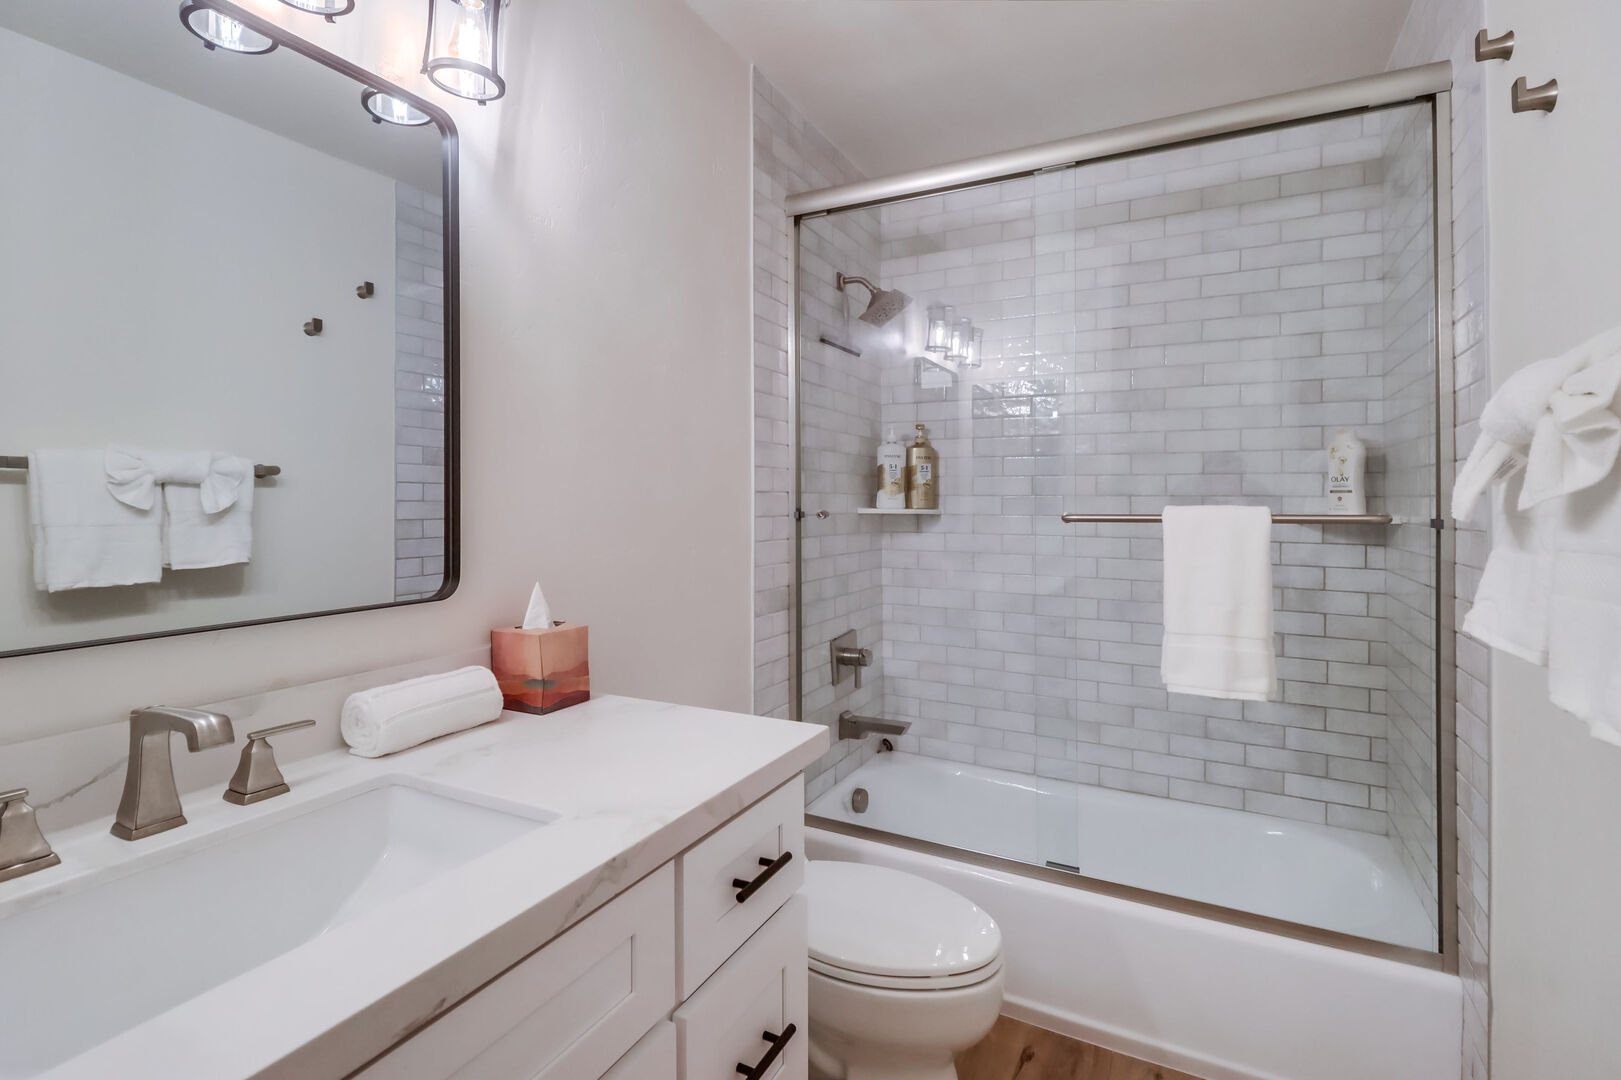 BRAND NEW! Located between guest bedrooms, vanity with beautiful lighting and shower-tub combo